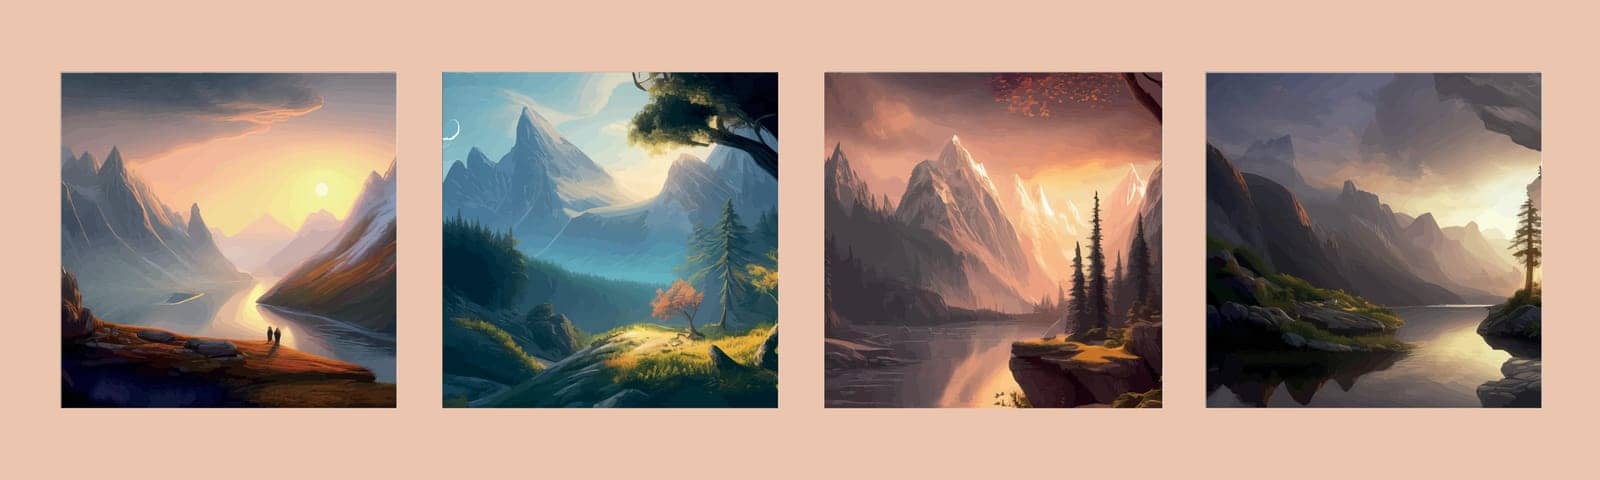 Forest and mountains river landscape vector. Foggy cloudy day vector illustration. Summer season alpine wildlife with scenic view